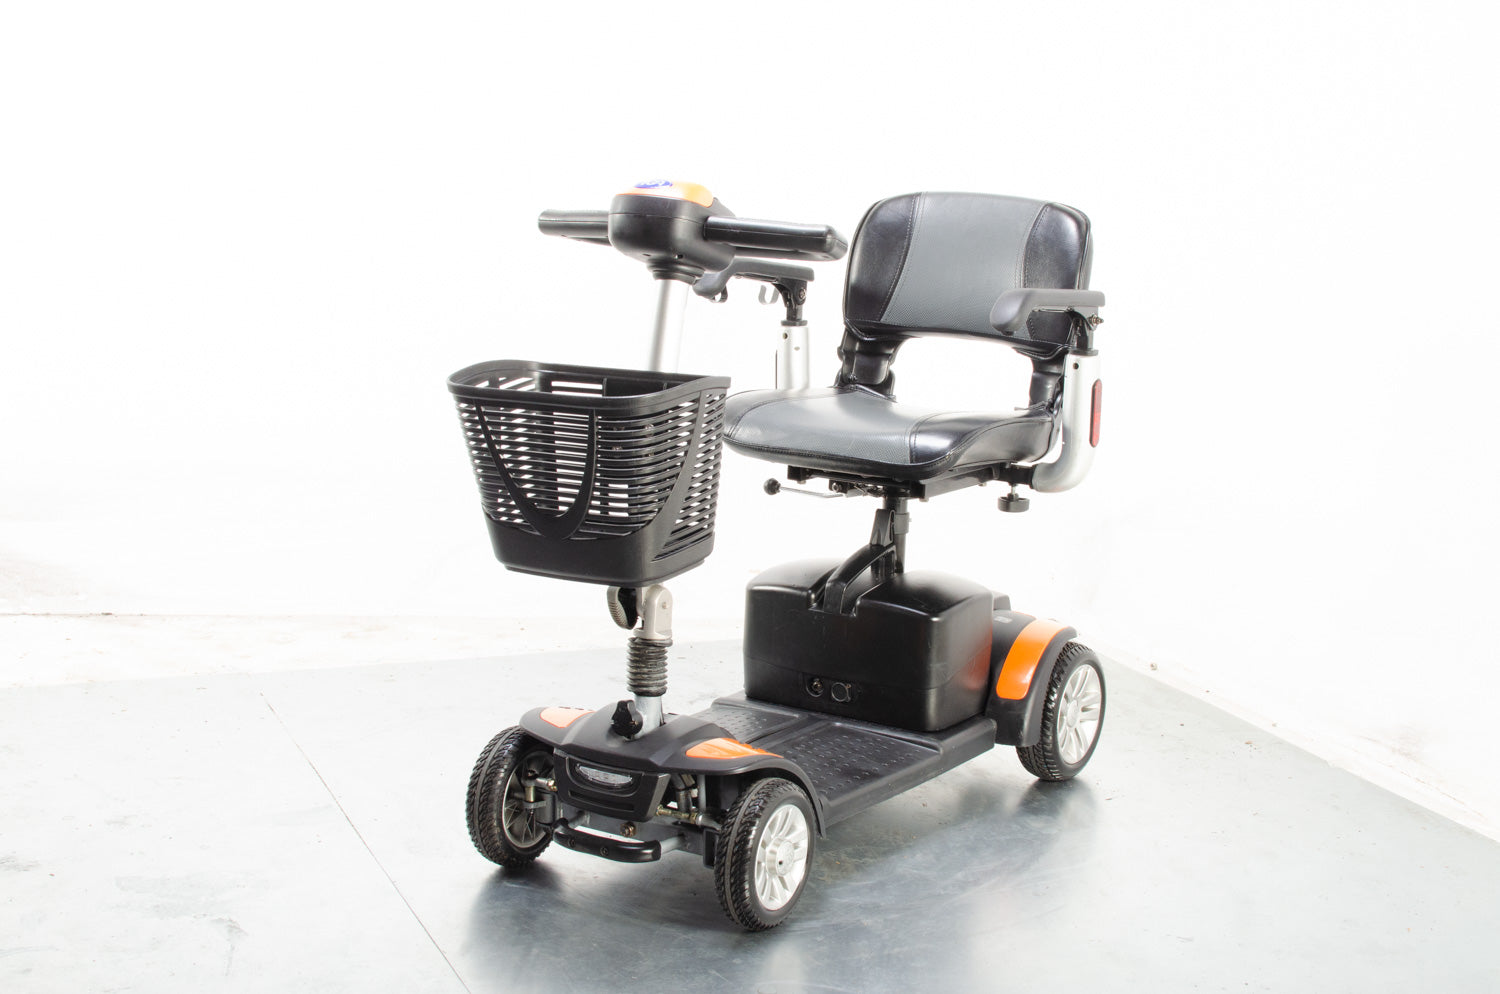 2015 TGA Eclipse 4mph Transportable Mobility Boot Scooter in Orange